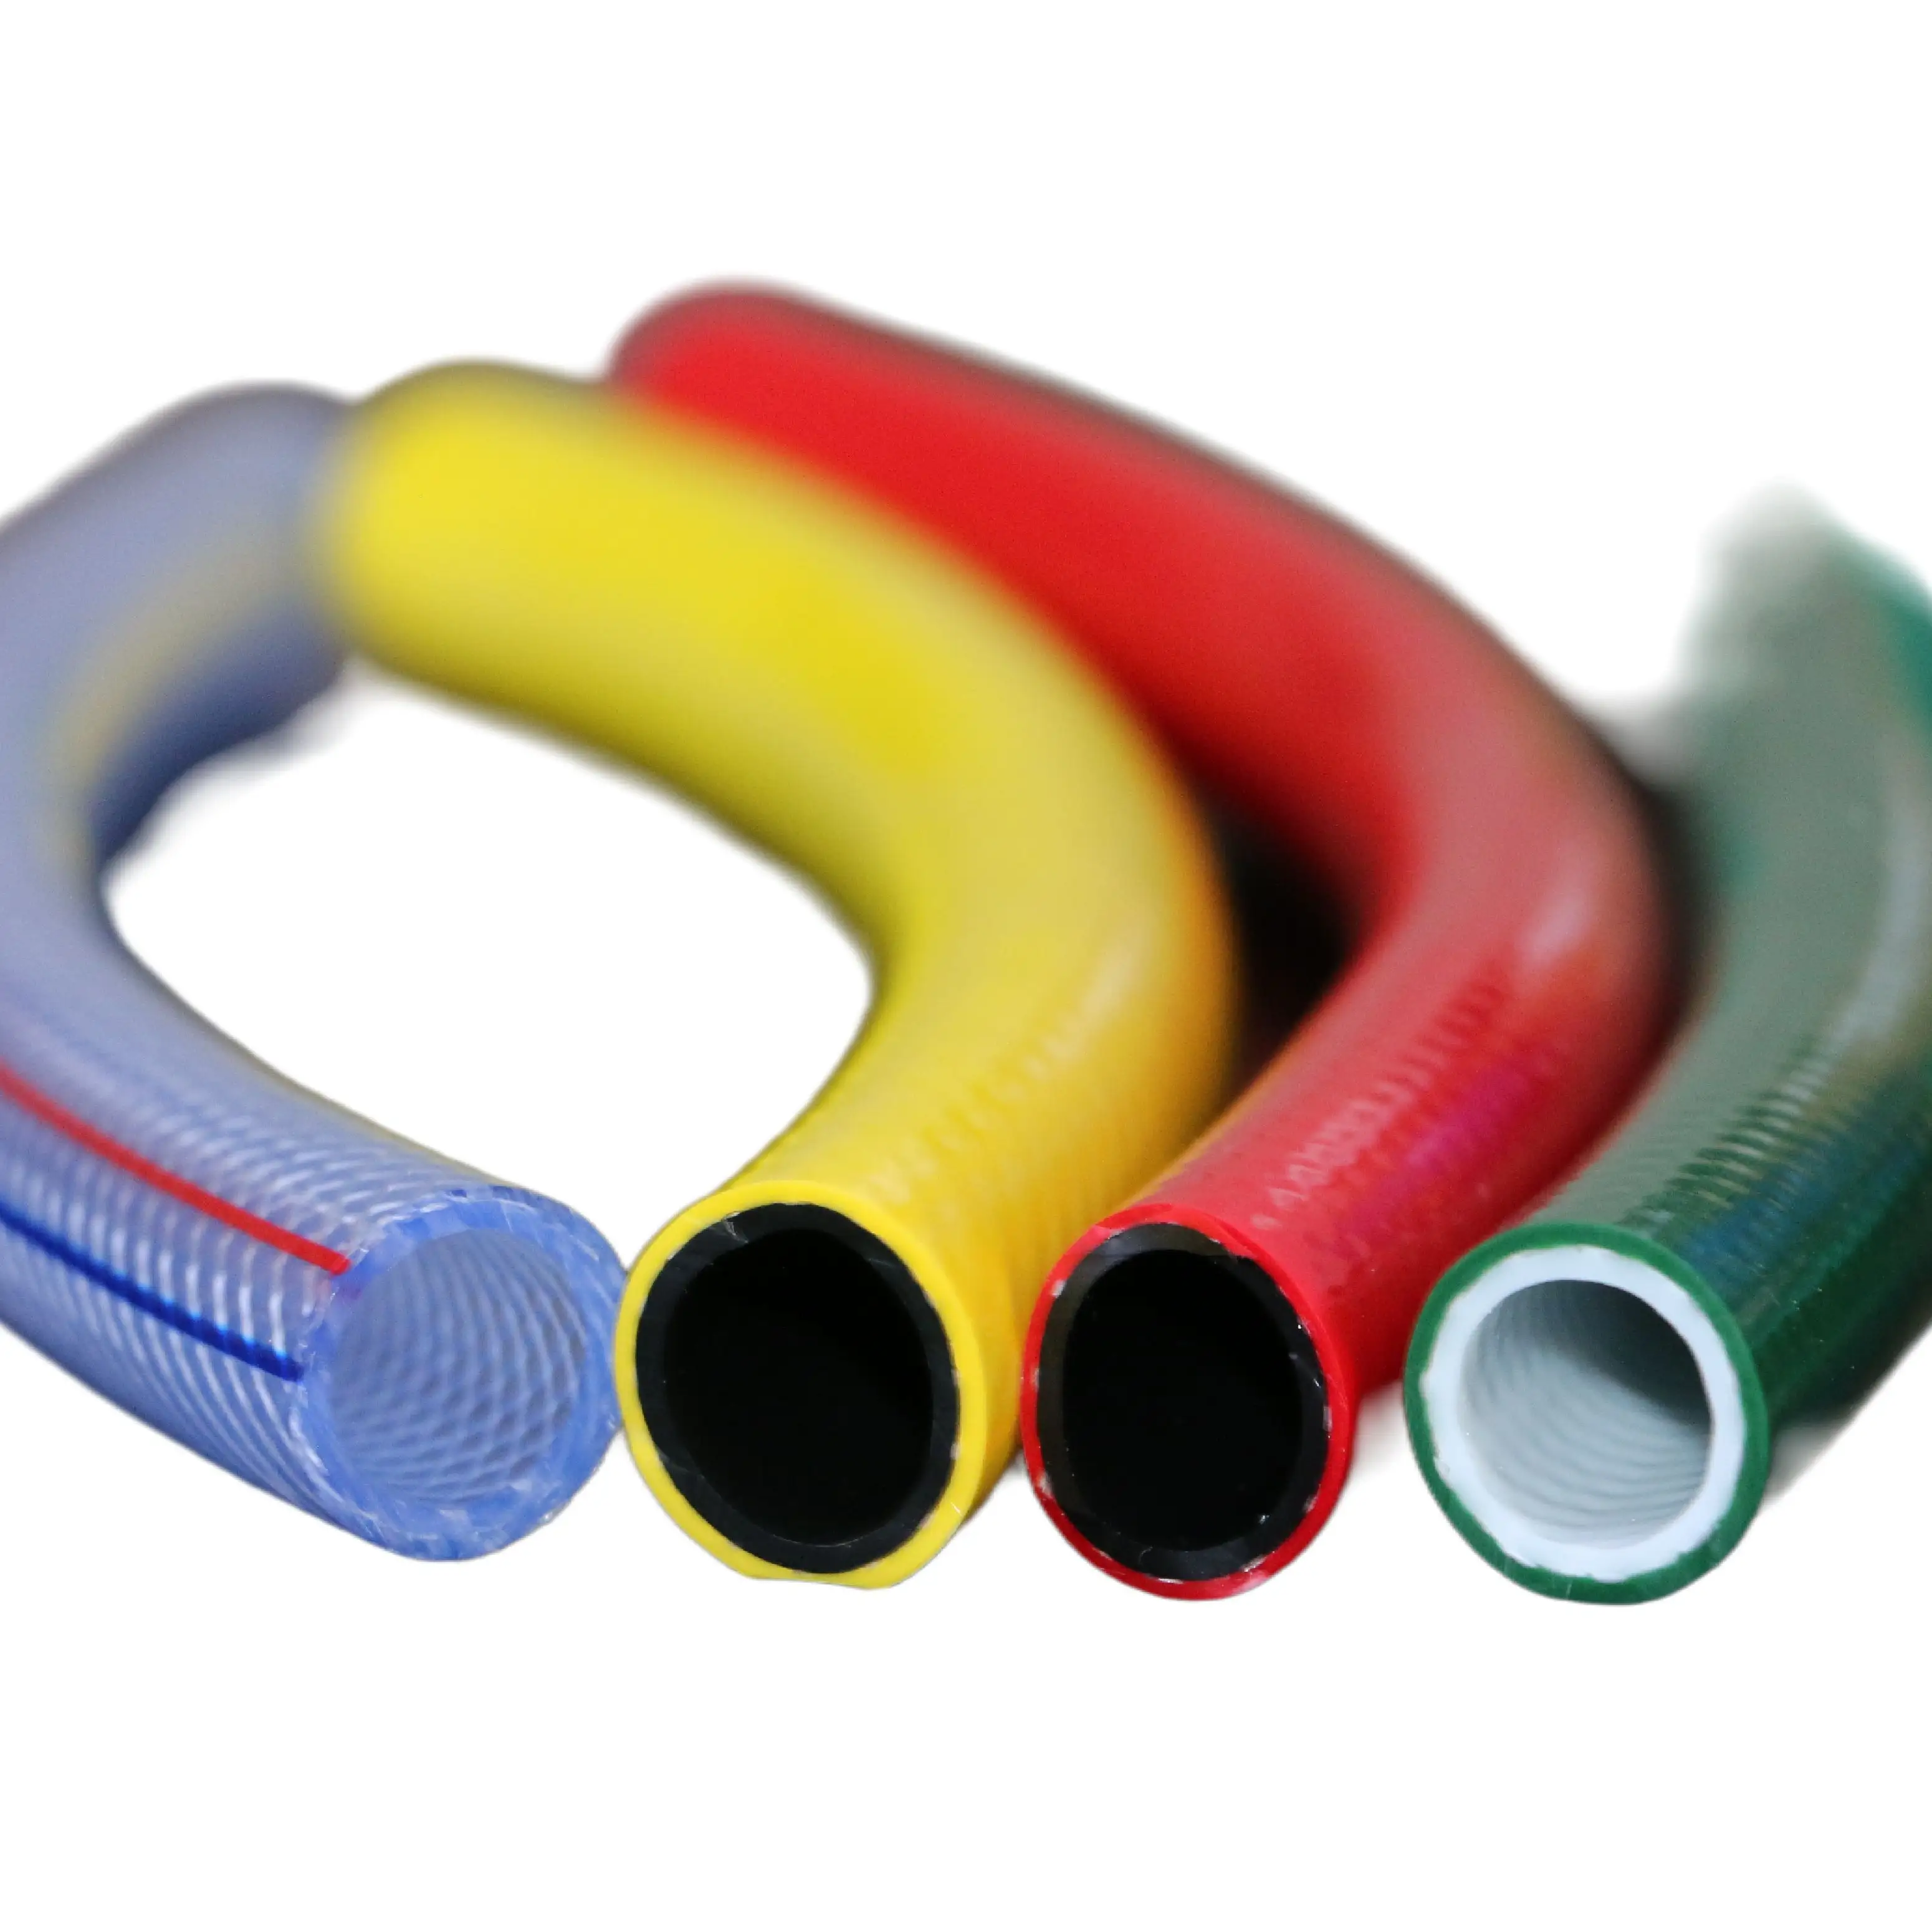 High Quality Good Price Pvc Garden Hose With Brass Fittings Durable And Corrosion-Resistant Hose For Easy Connection